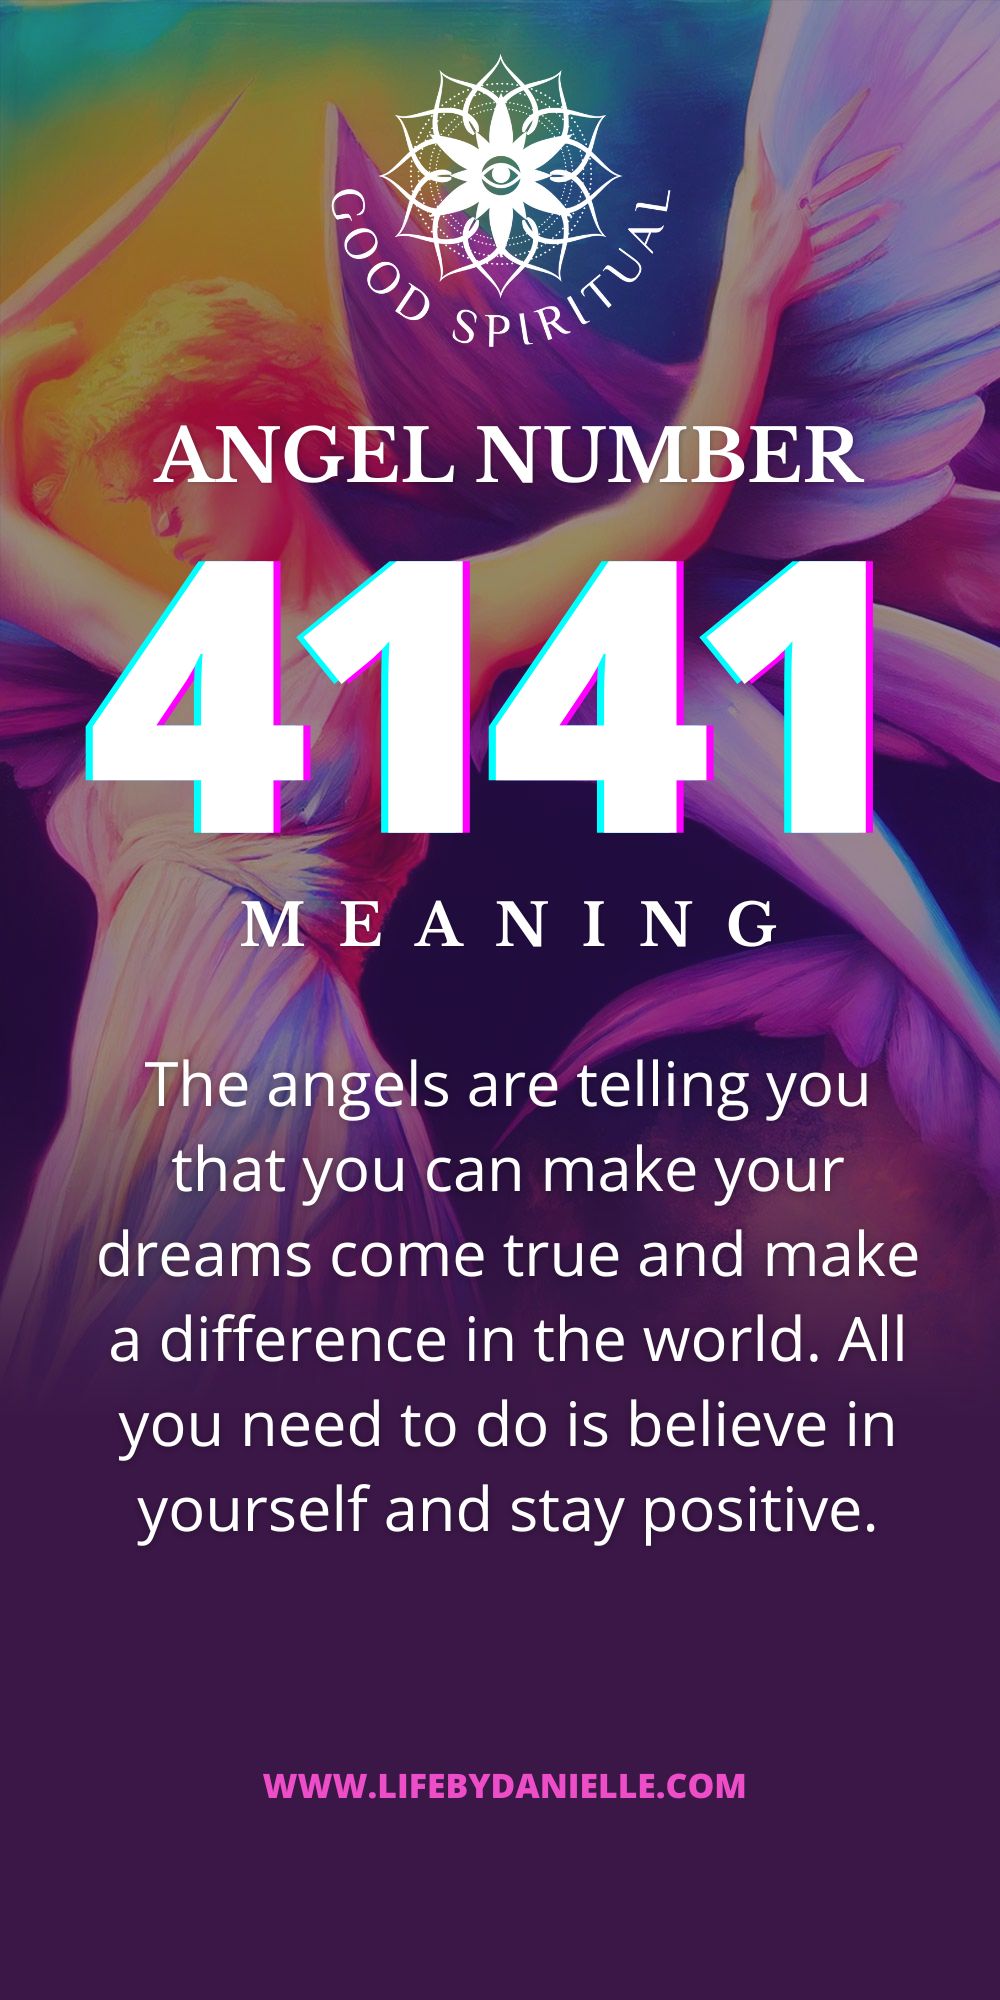 Angel Number 4141 Meaning